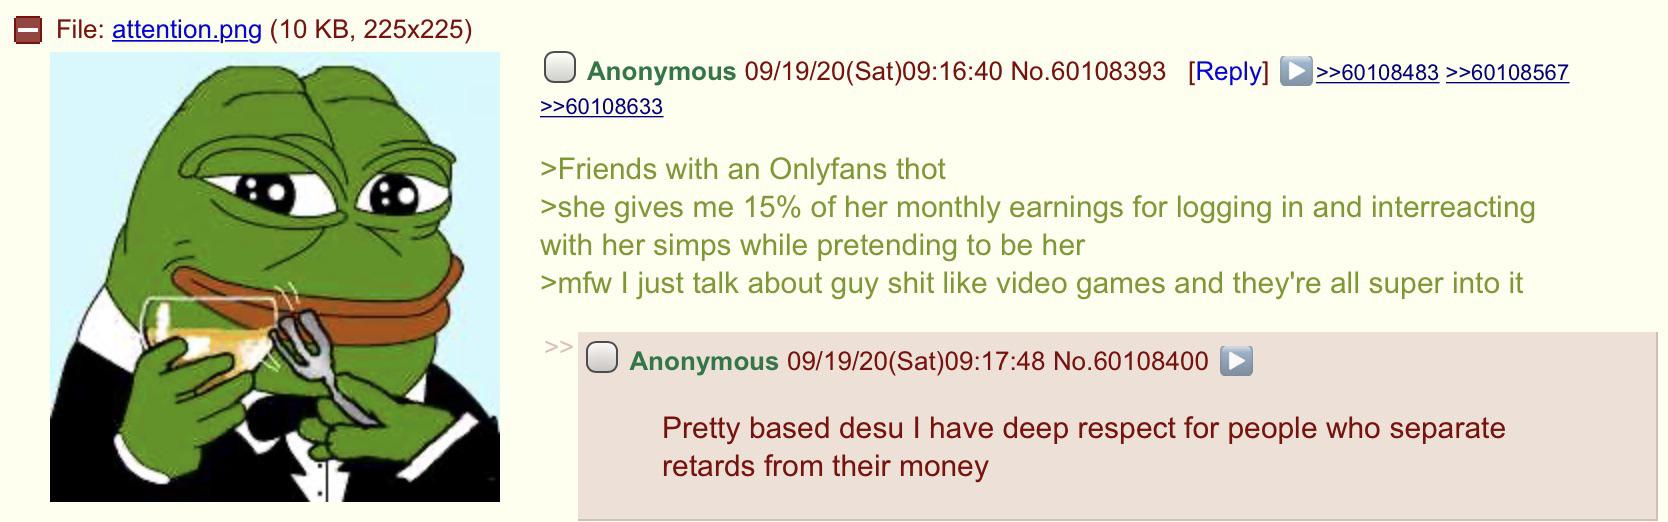 Anon works Onlyfans.